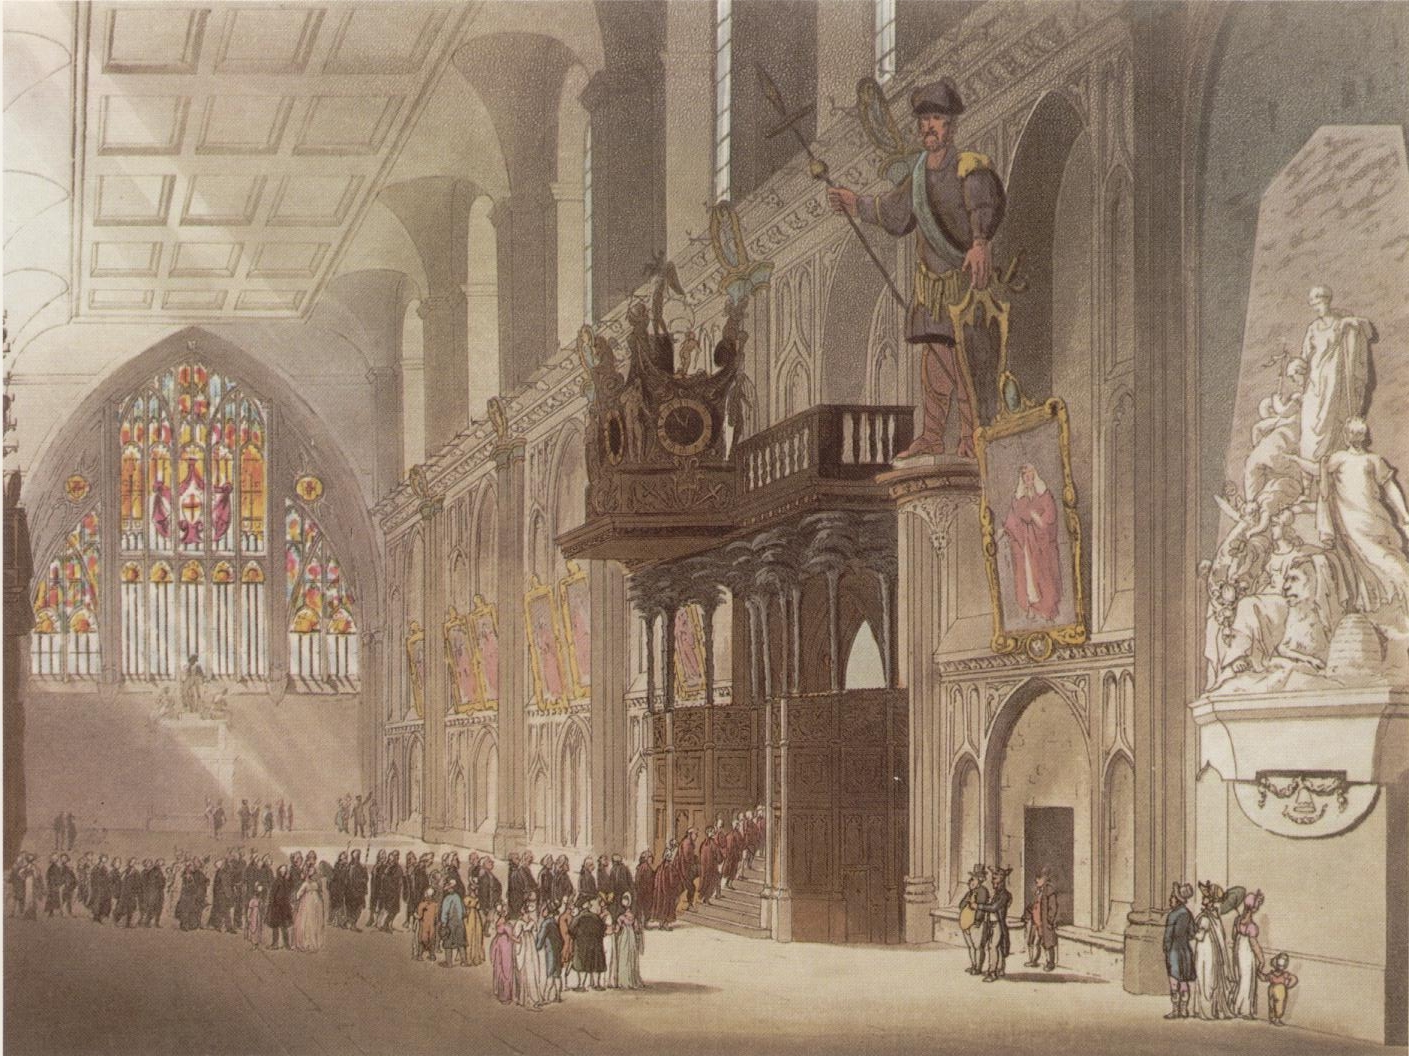 The Great Hall of the Guildhall, with a procession of Common Councilmen and Aldermen snaking across the centre